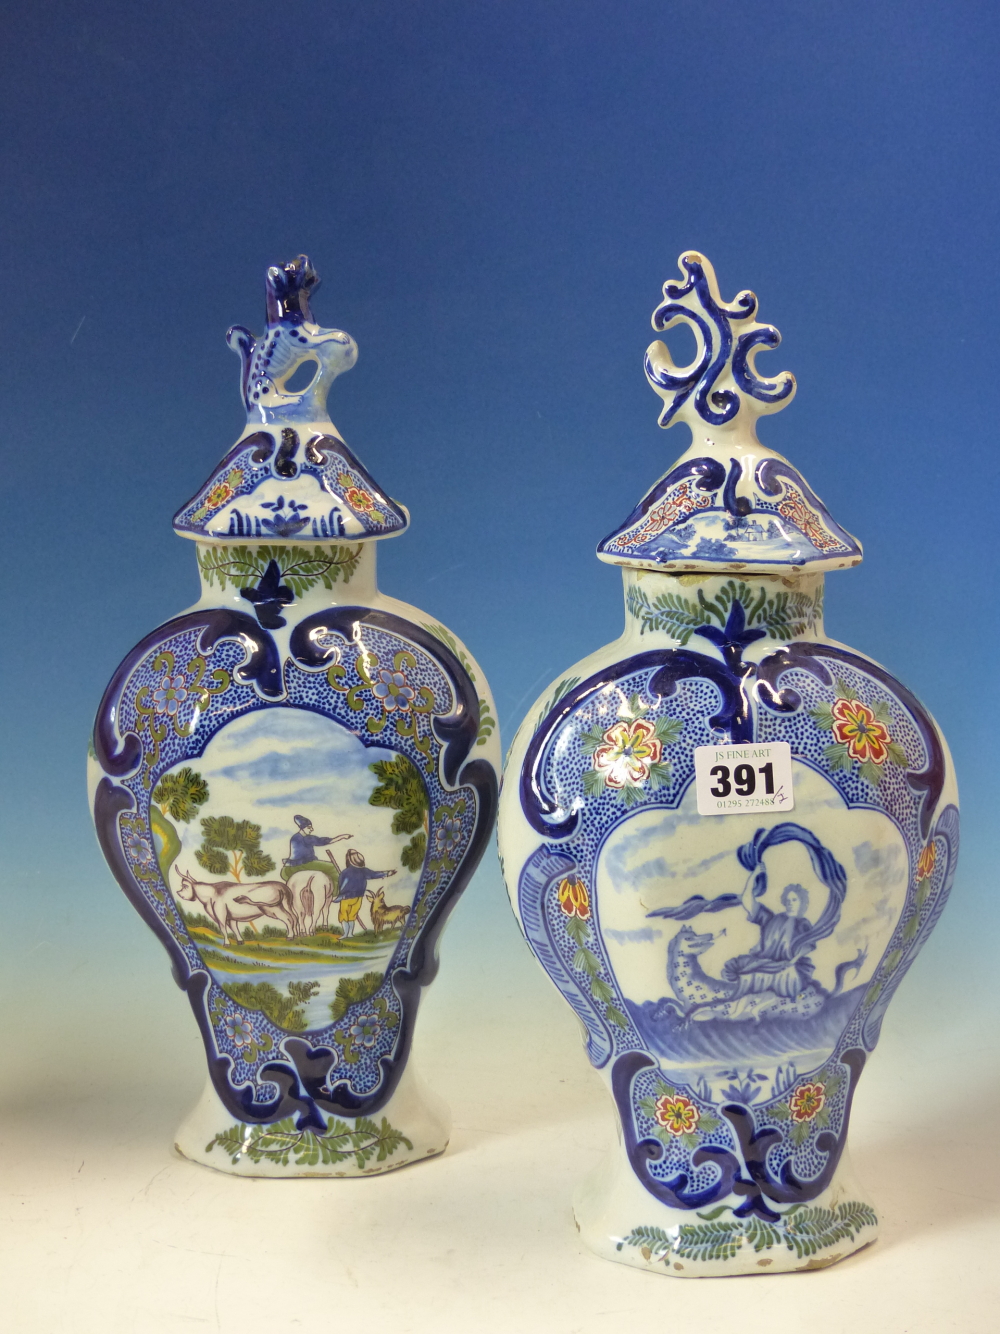 TWO 19th C. DUTCH DELFT POLYCHROME VASES AND COVERS OF FLATTENED BALUSTER SHAPE, ONE PAINTED WITH